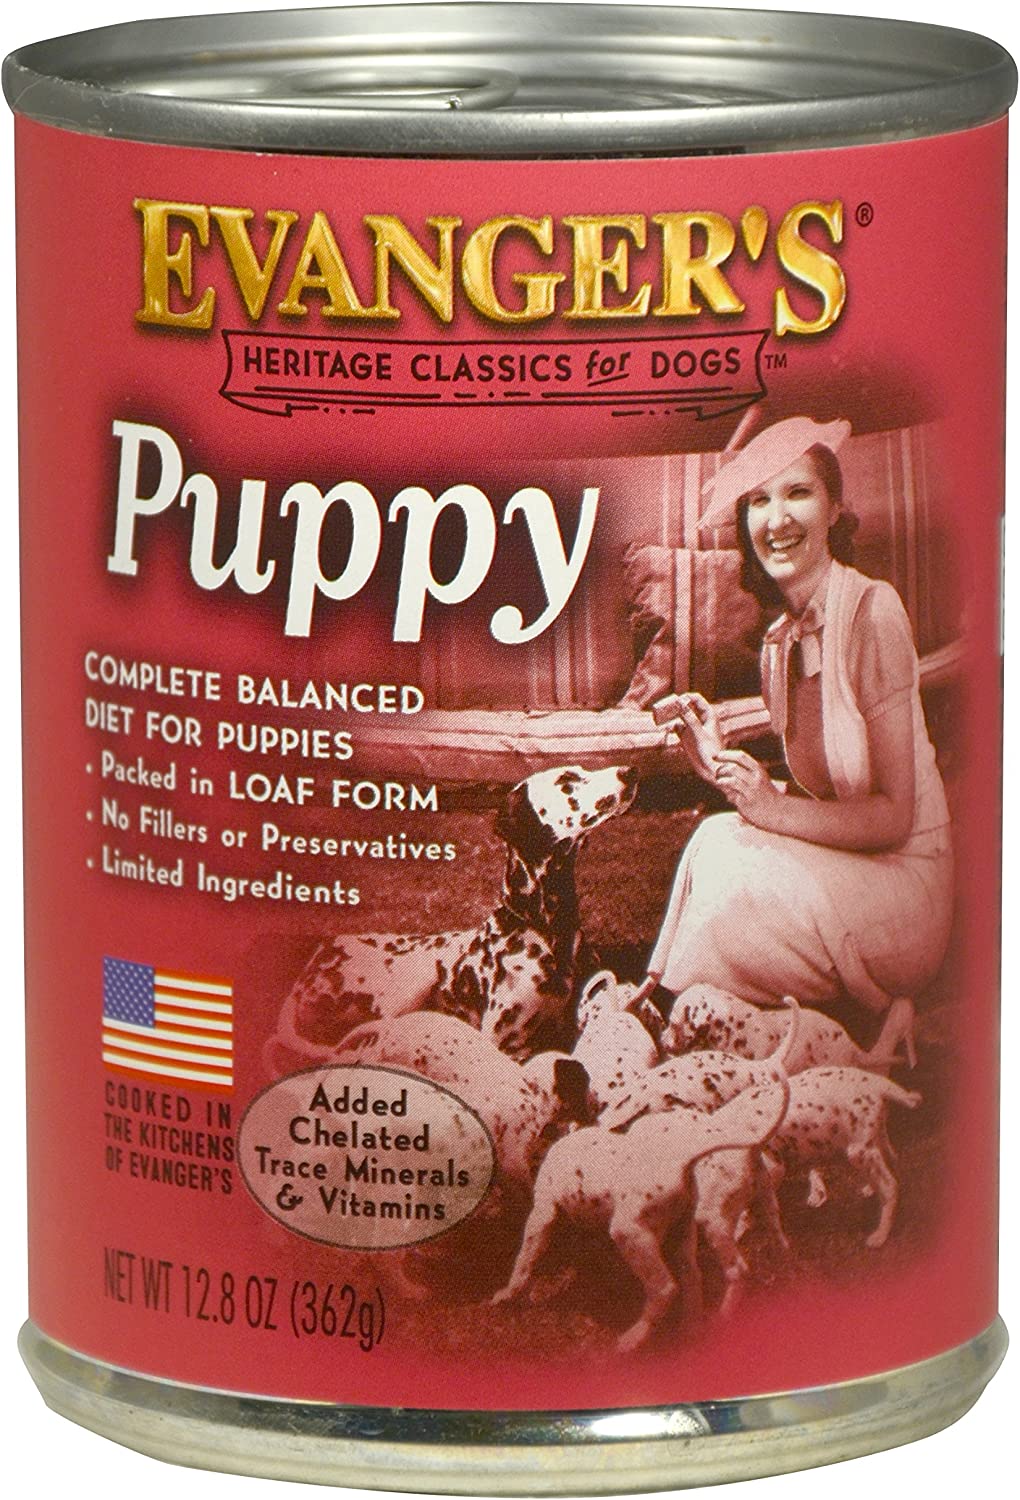 Evanger's Heritage Classic Puppy and Underweight Dogs Recipe, 12 x 12.8 oz cans